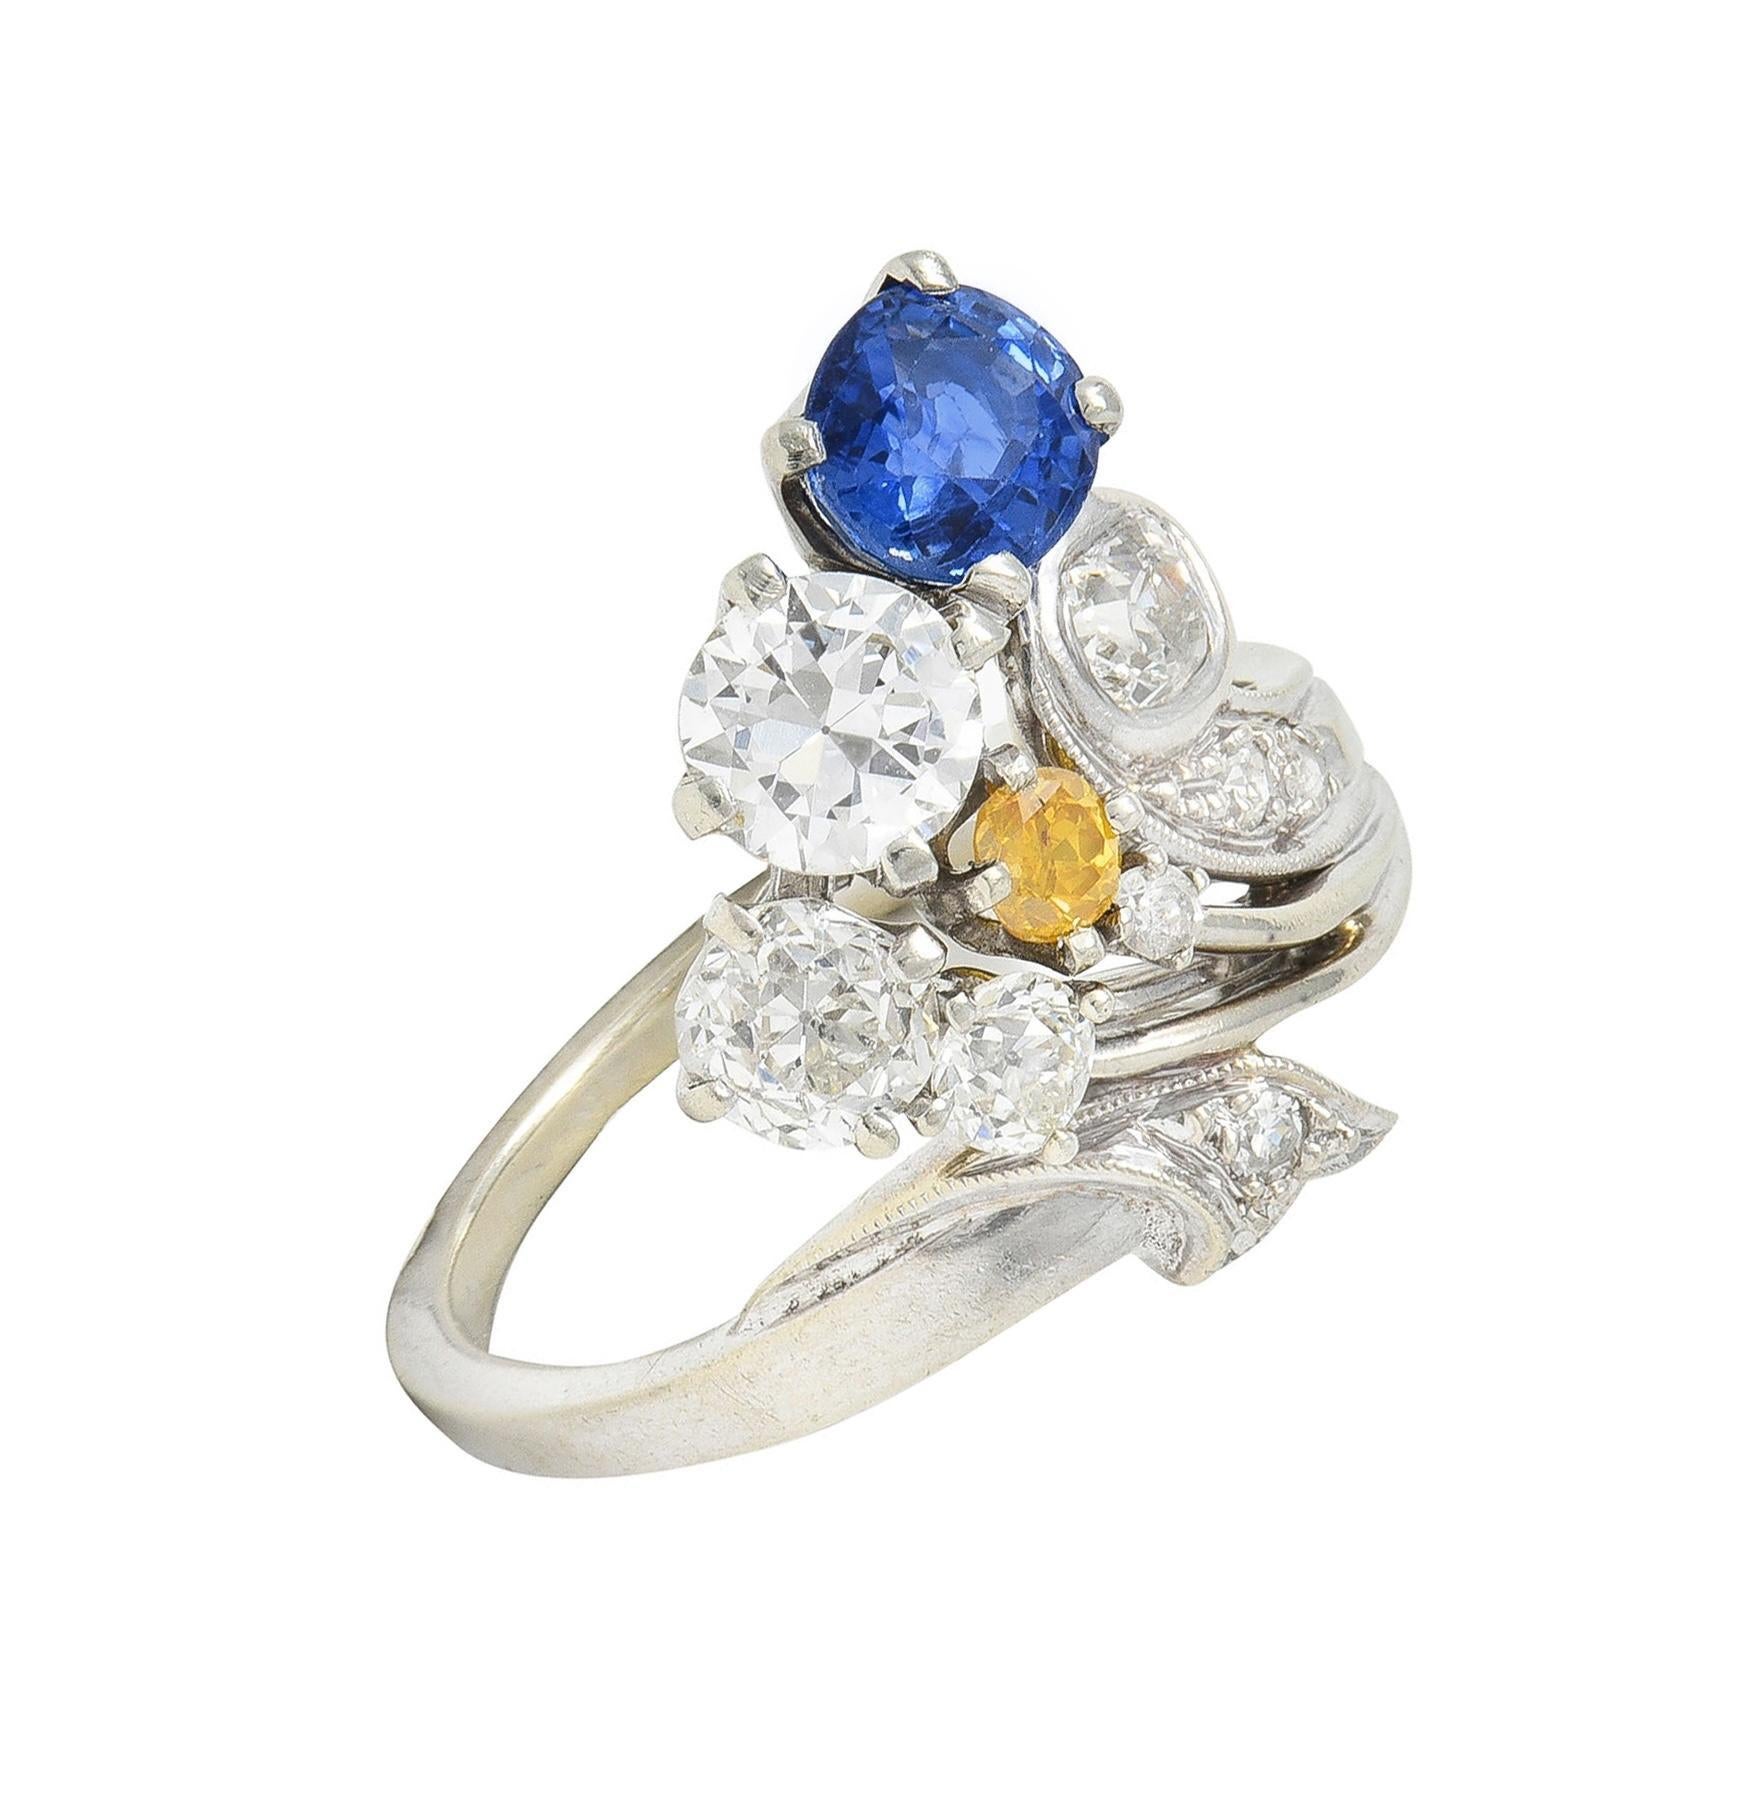 Erwin Reu Co. Mid-Century 2.03 CTW Sapphire Diamond 14 Karat Gold Bypass Ring In Excellent Condition For Sale In Philadelphia, PA